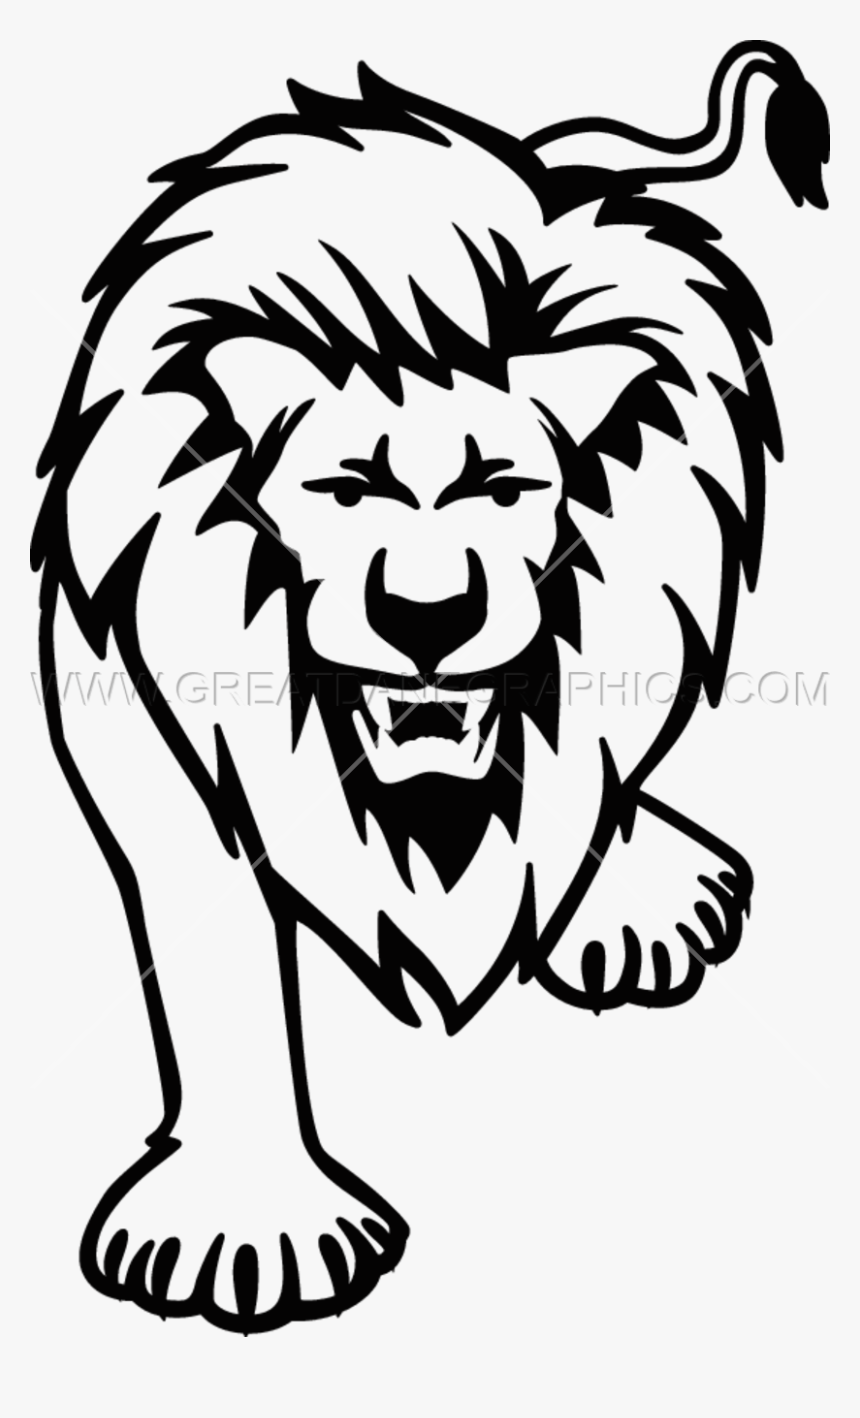 Circus Lion Png Black And White - Lion Drawing Transparent, Png Download, Free Download